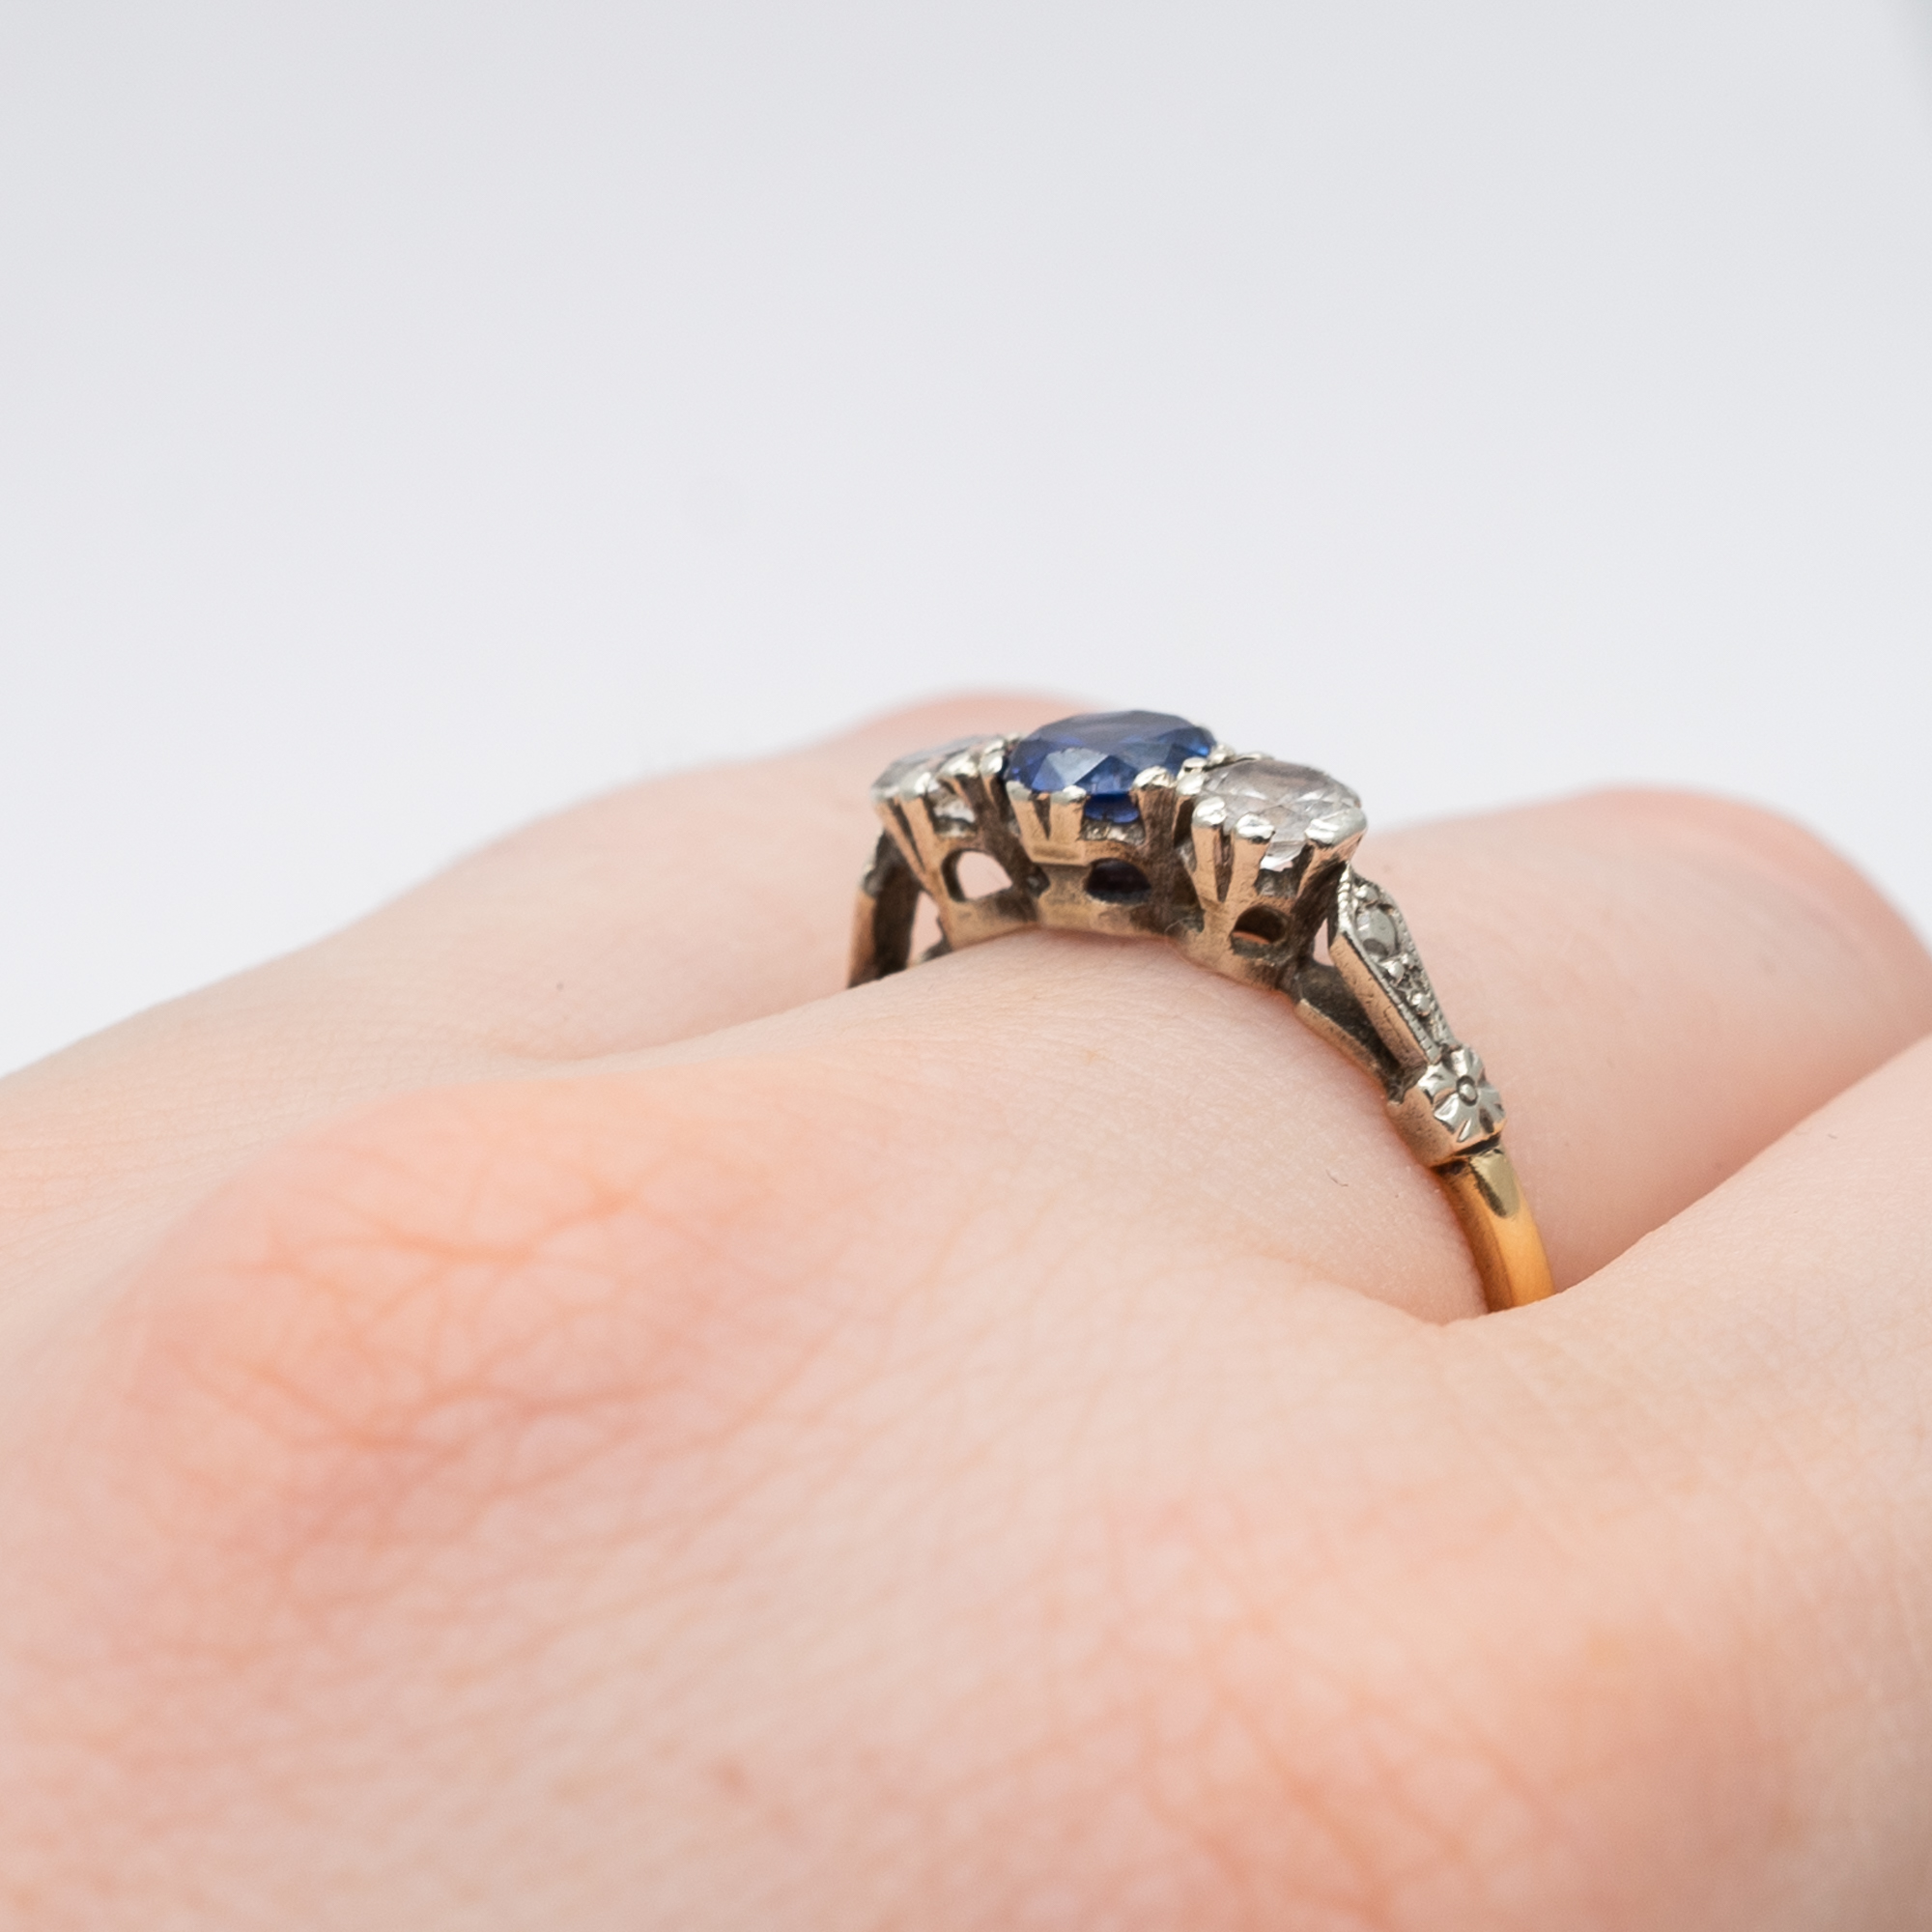 A 9ct yellow gold cz blue stone ring - Image 2 of 6